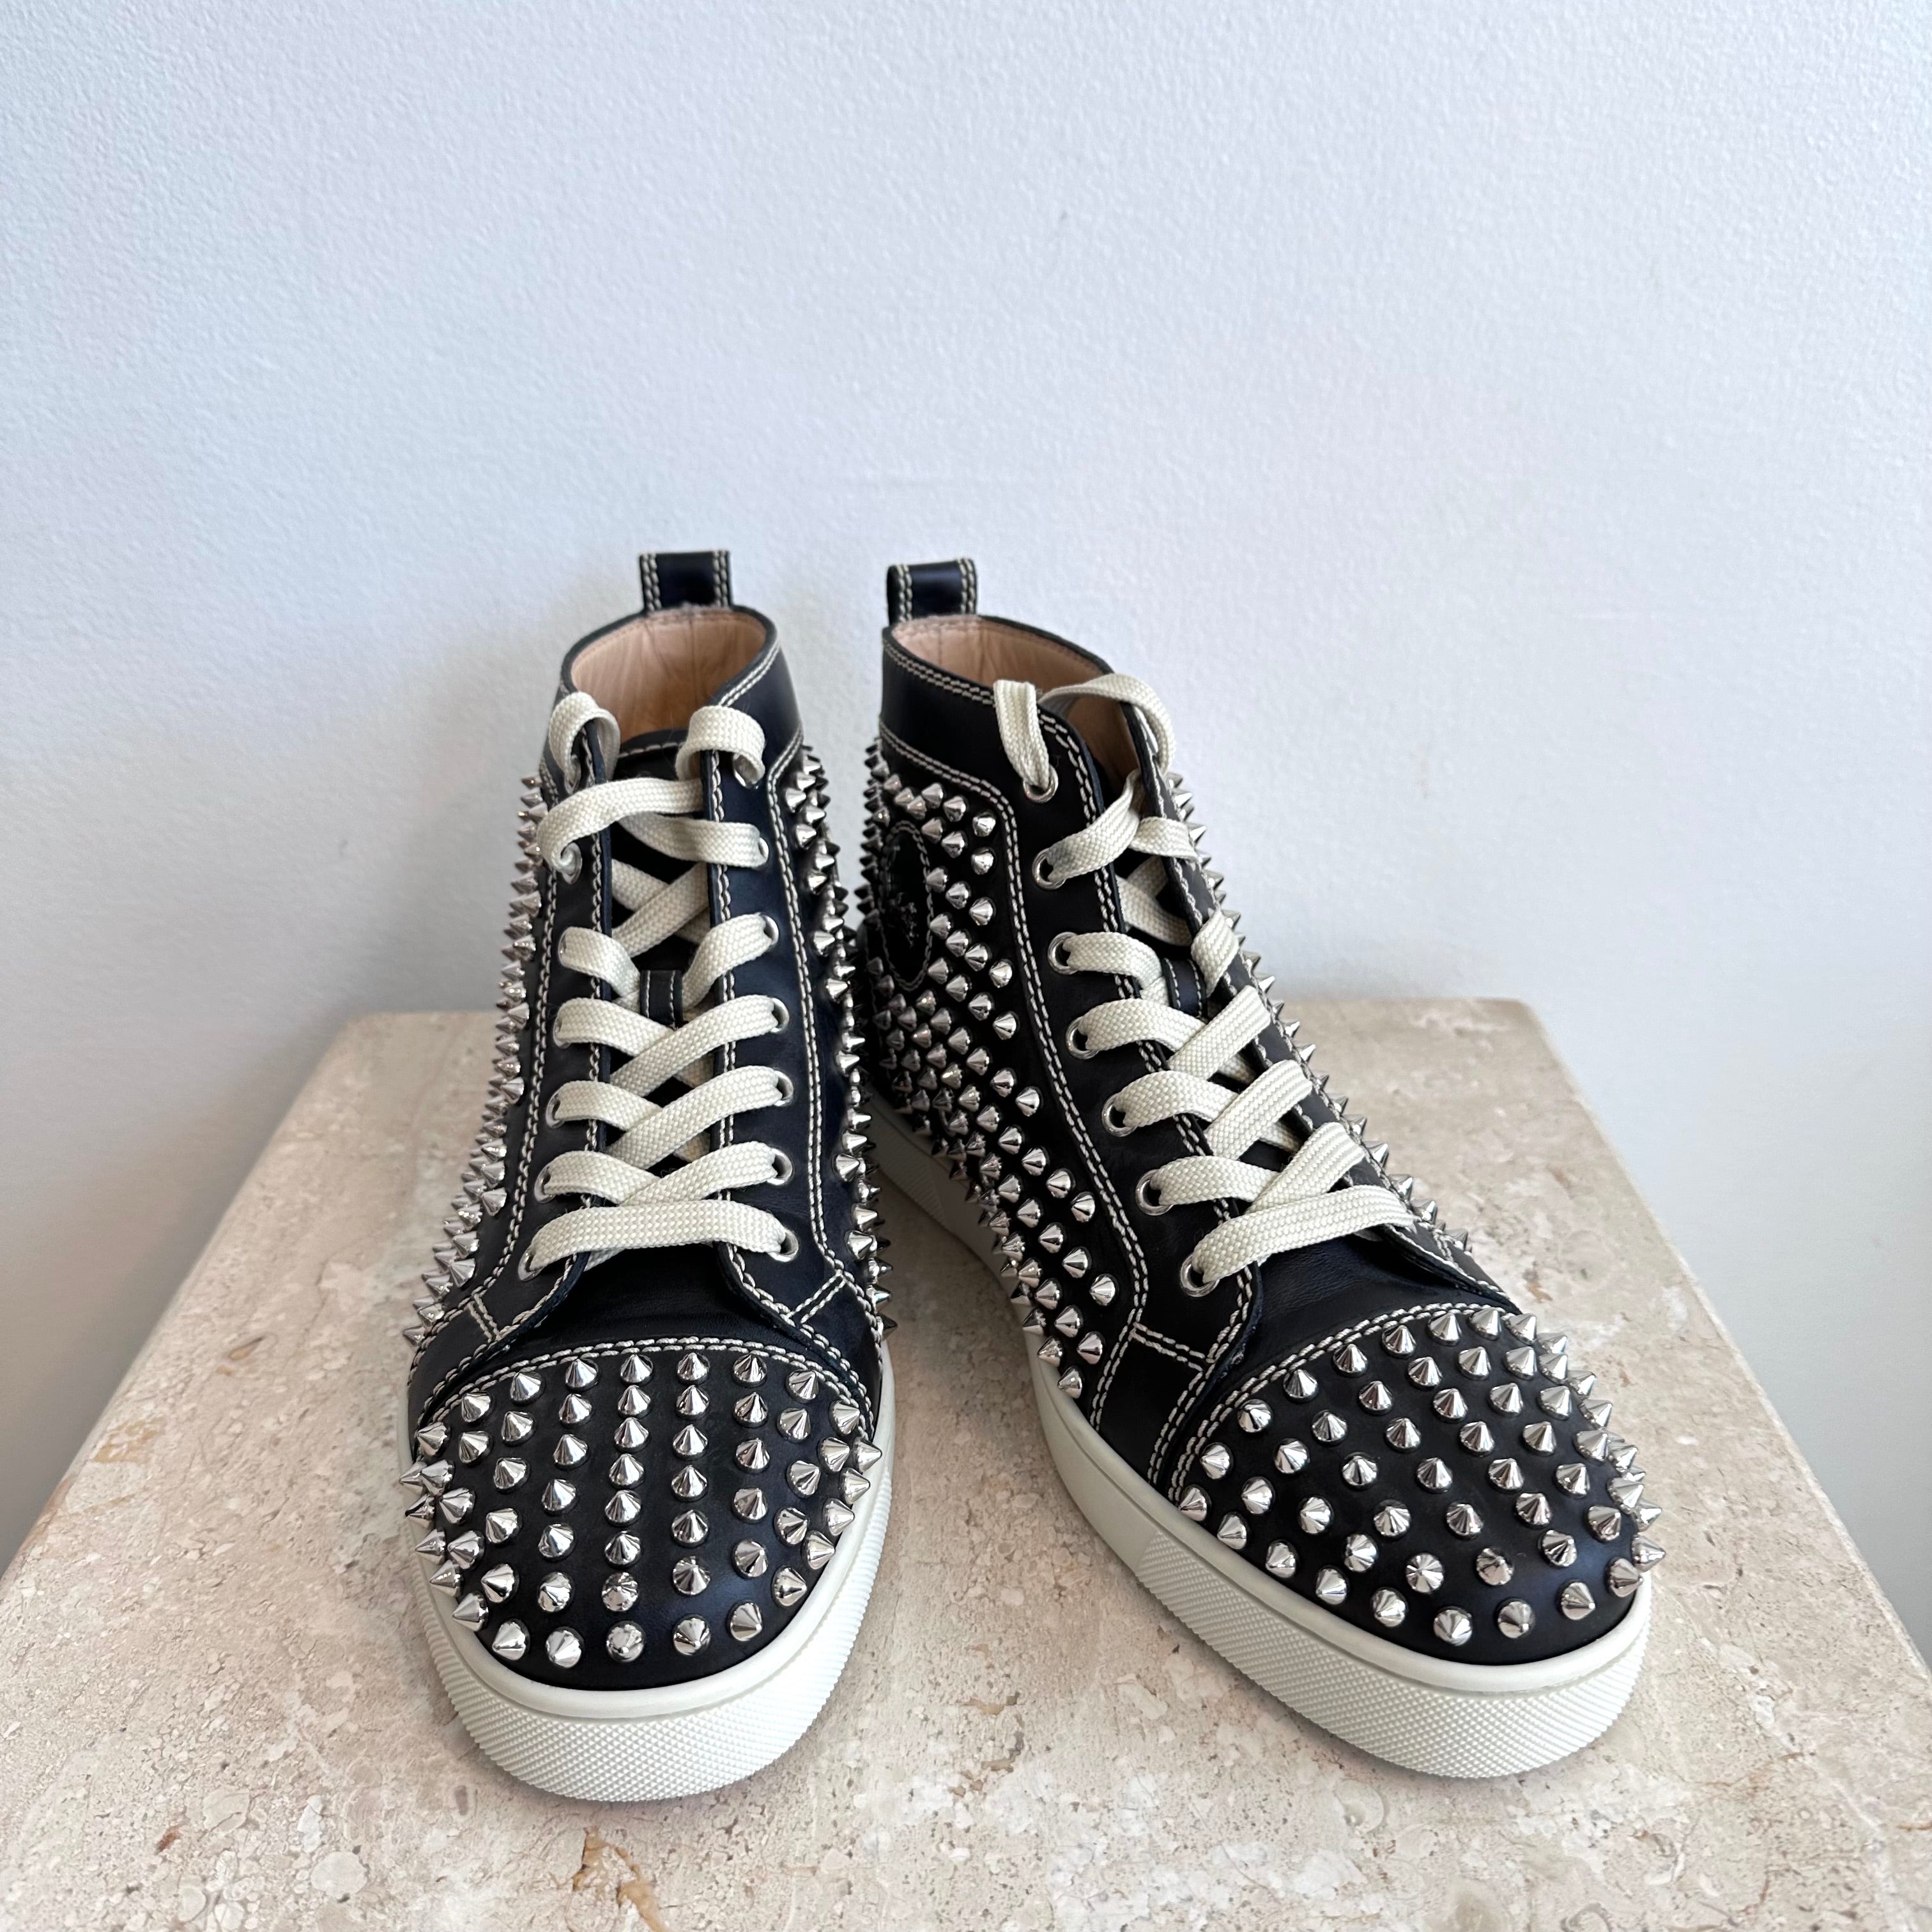 Pre-Owned CHRISTIAN LOUBOUTIN Black Men's Louis Mid-Top Spiked Leather Sneakers Size 41